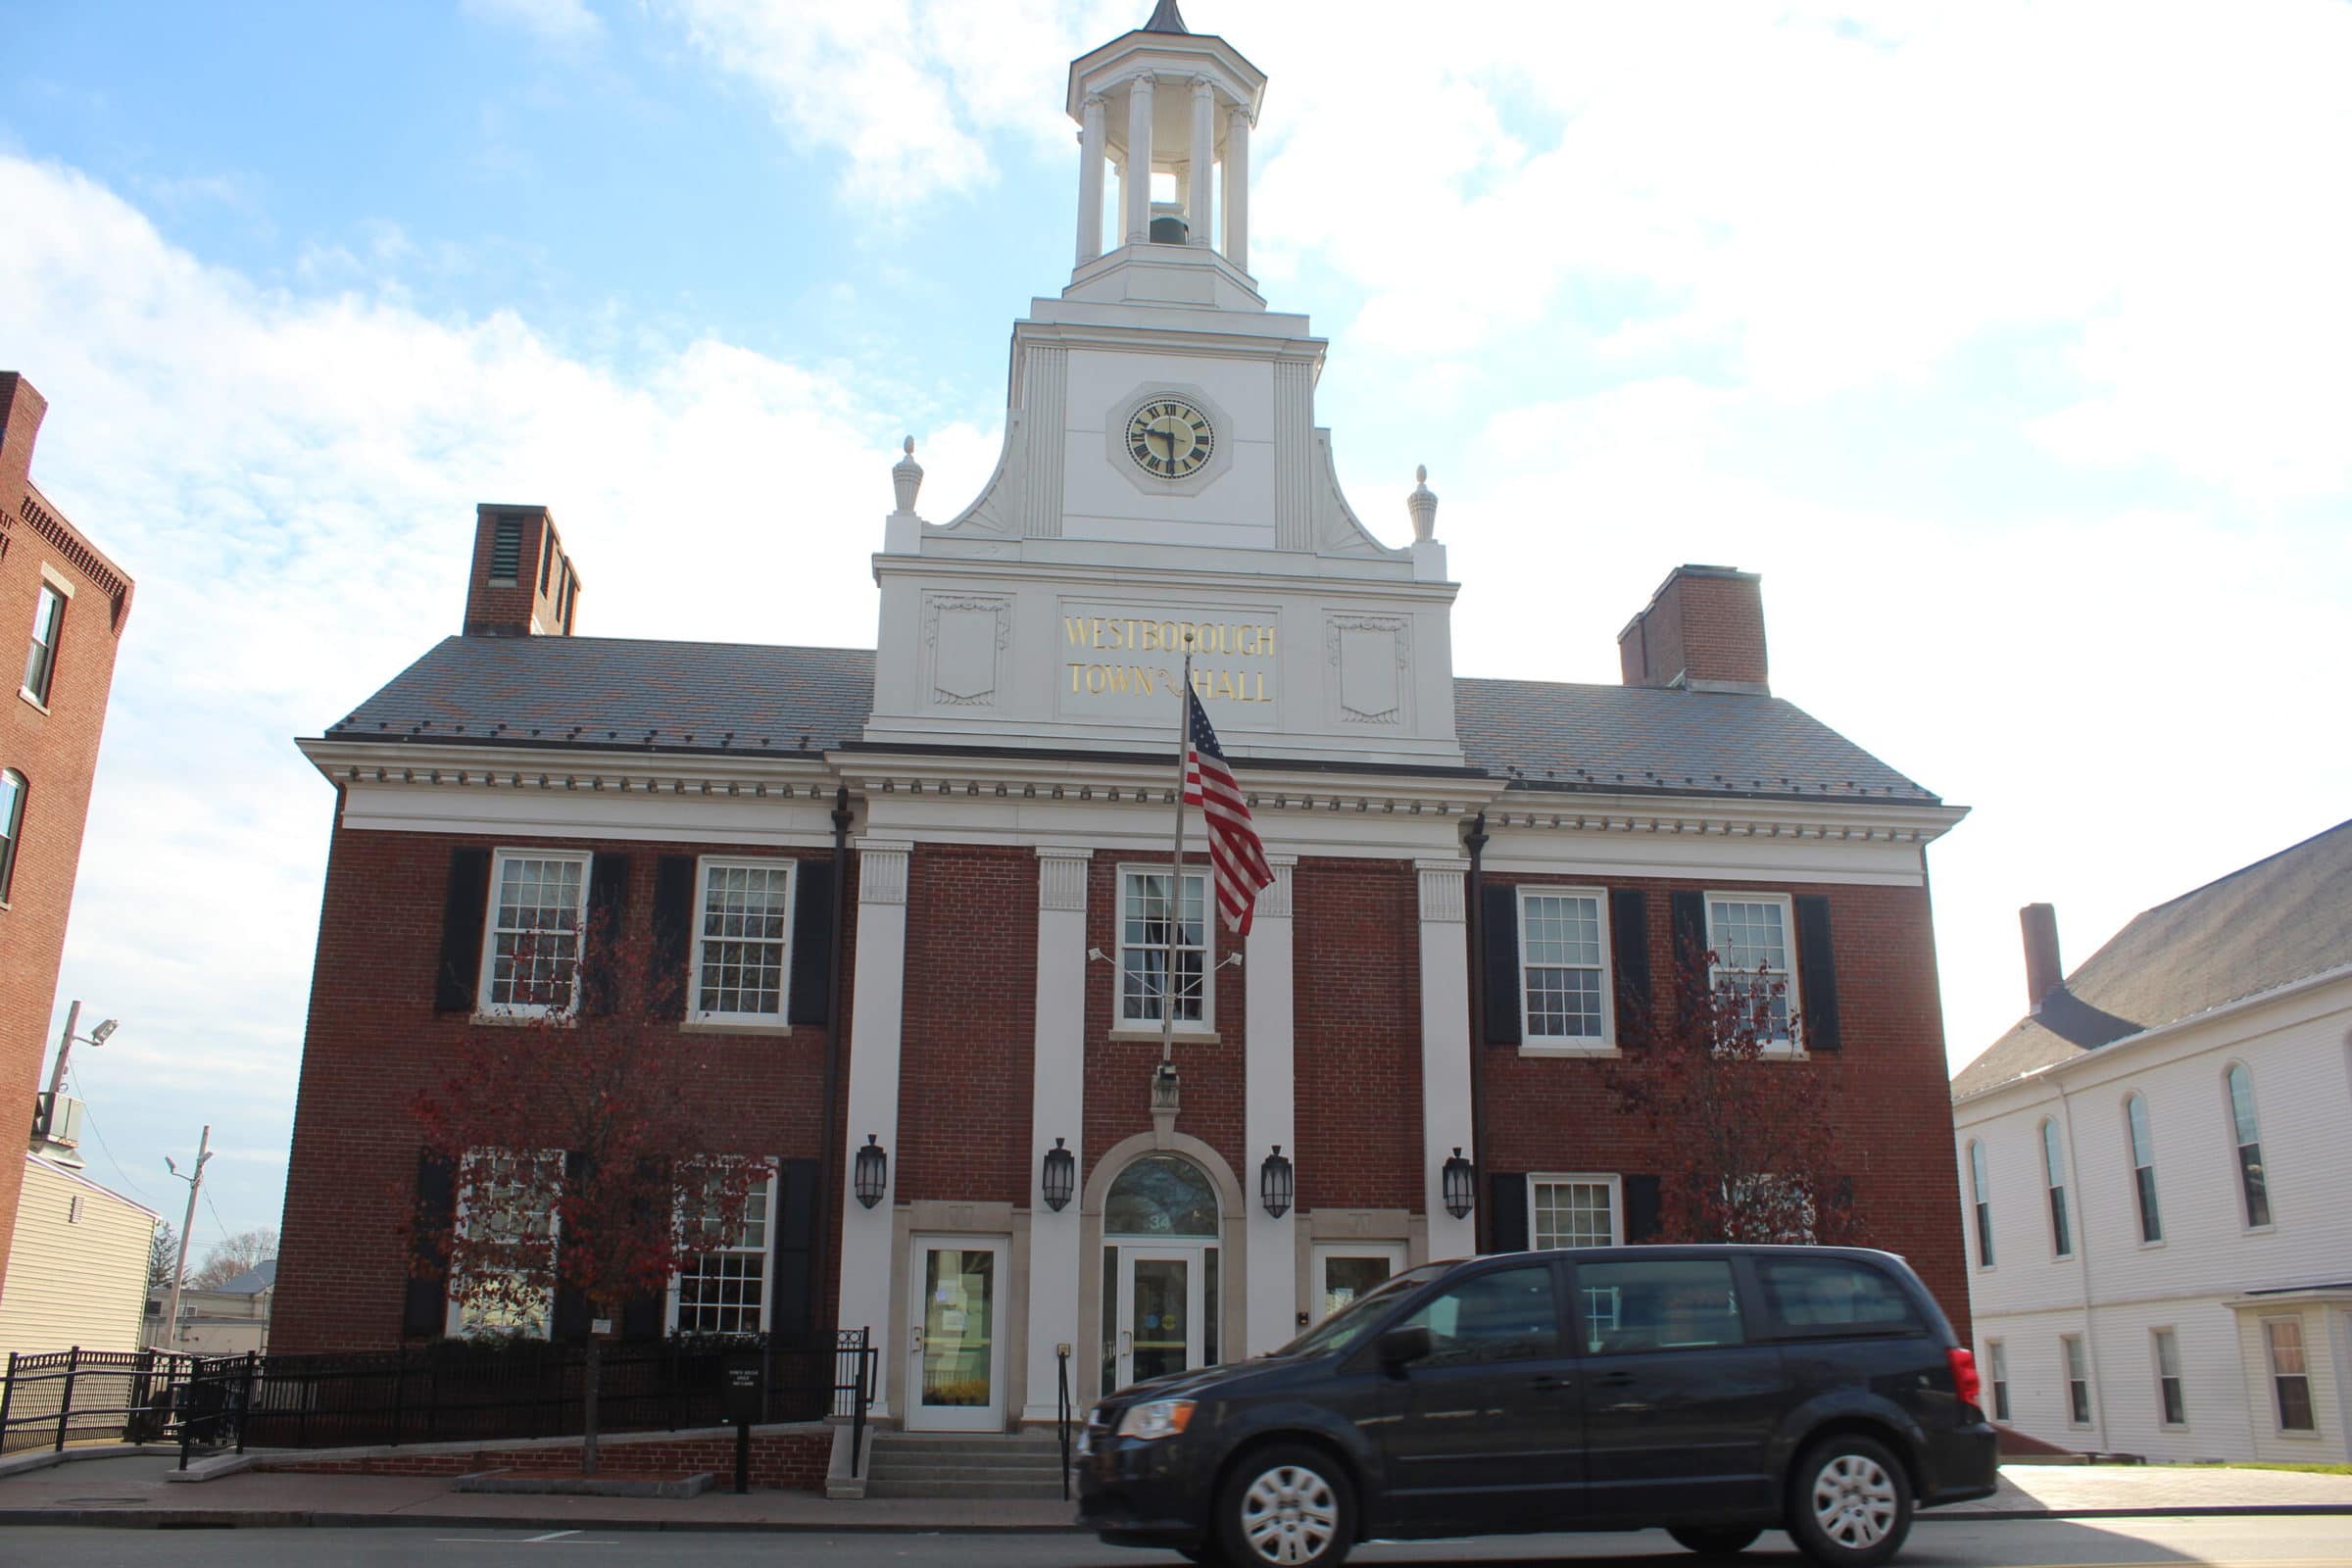 Westborough tax increase decreases from January estimate